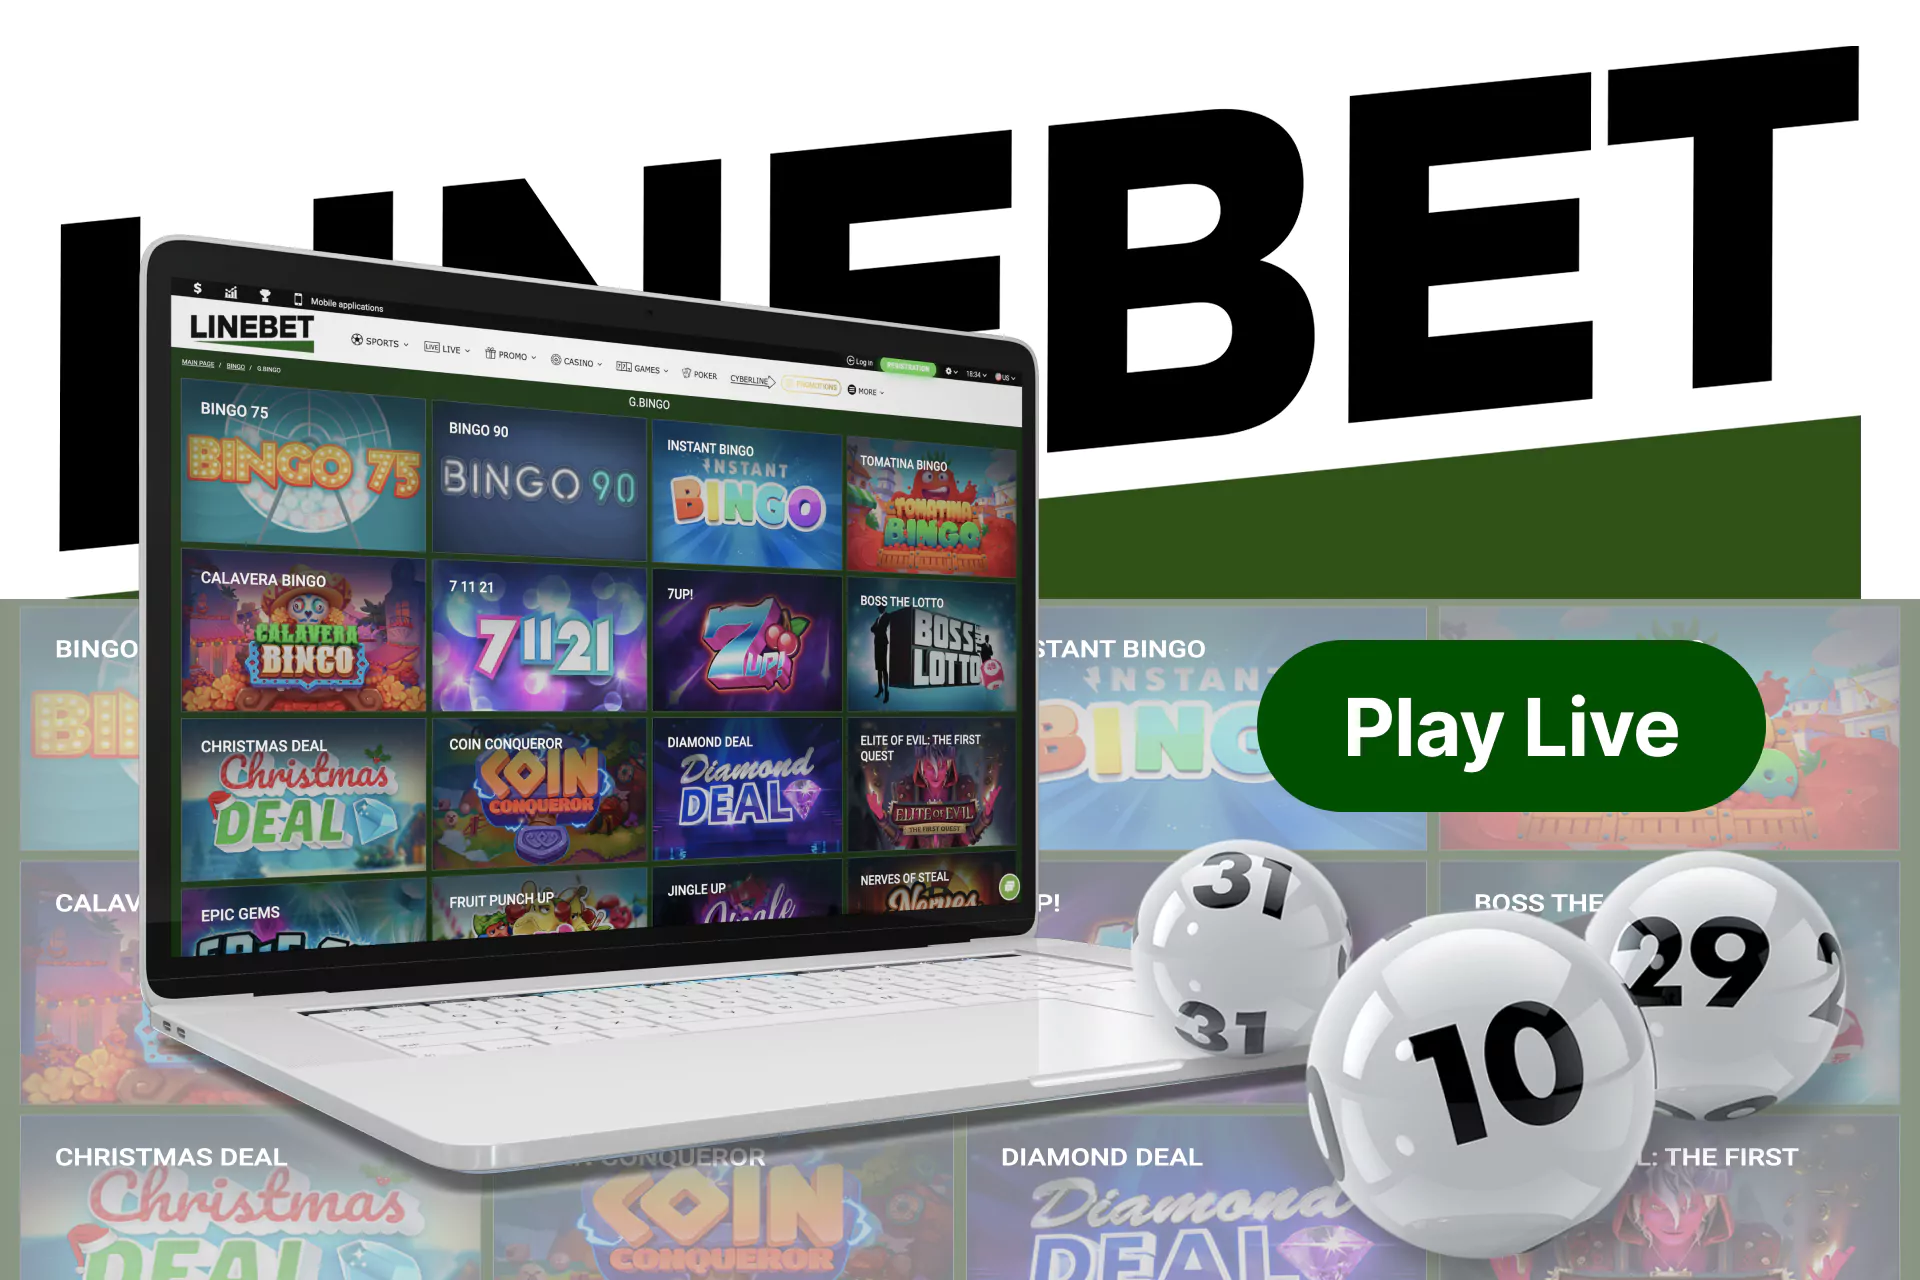 In Linebet, place bets on bingo at a live casino.